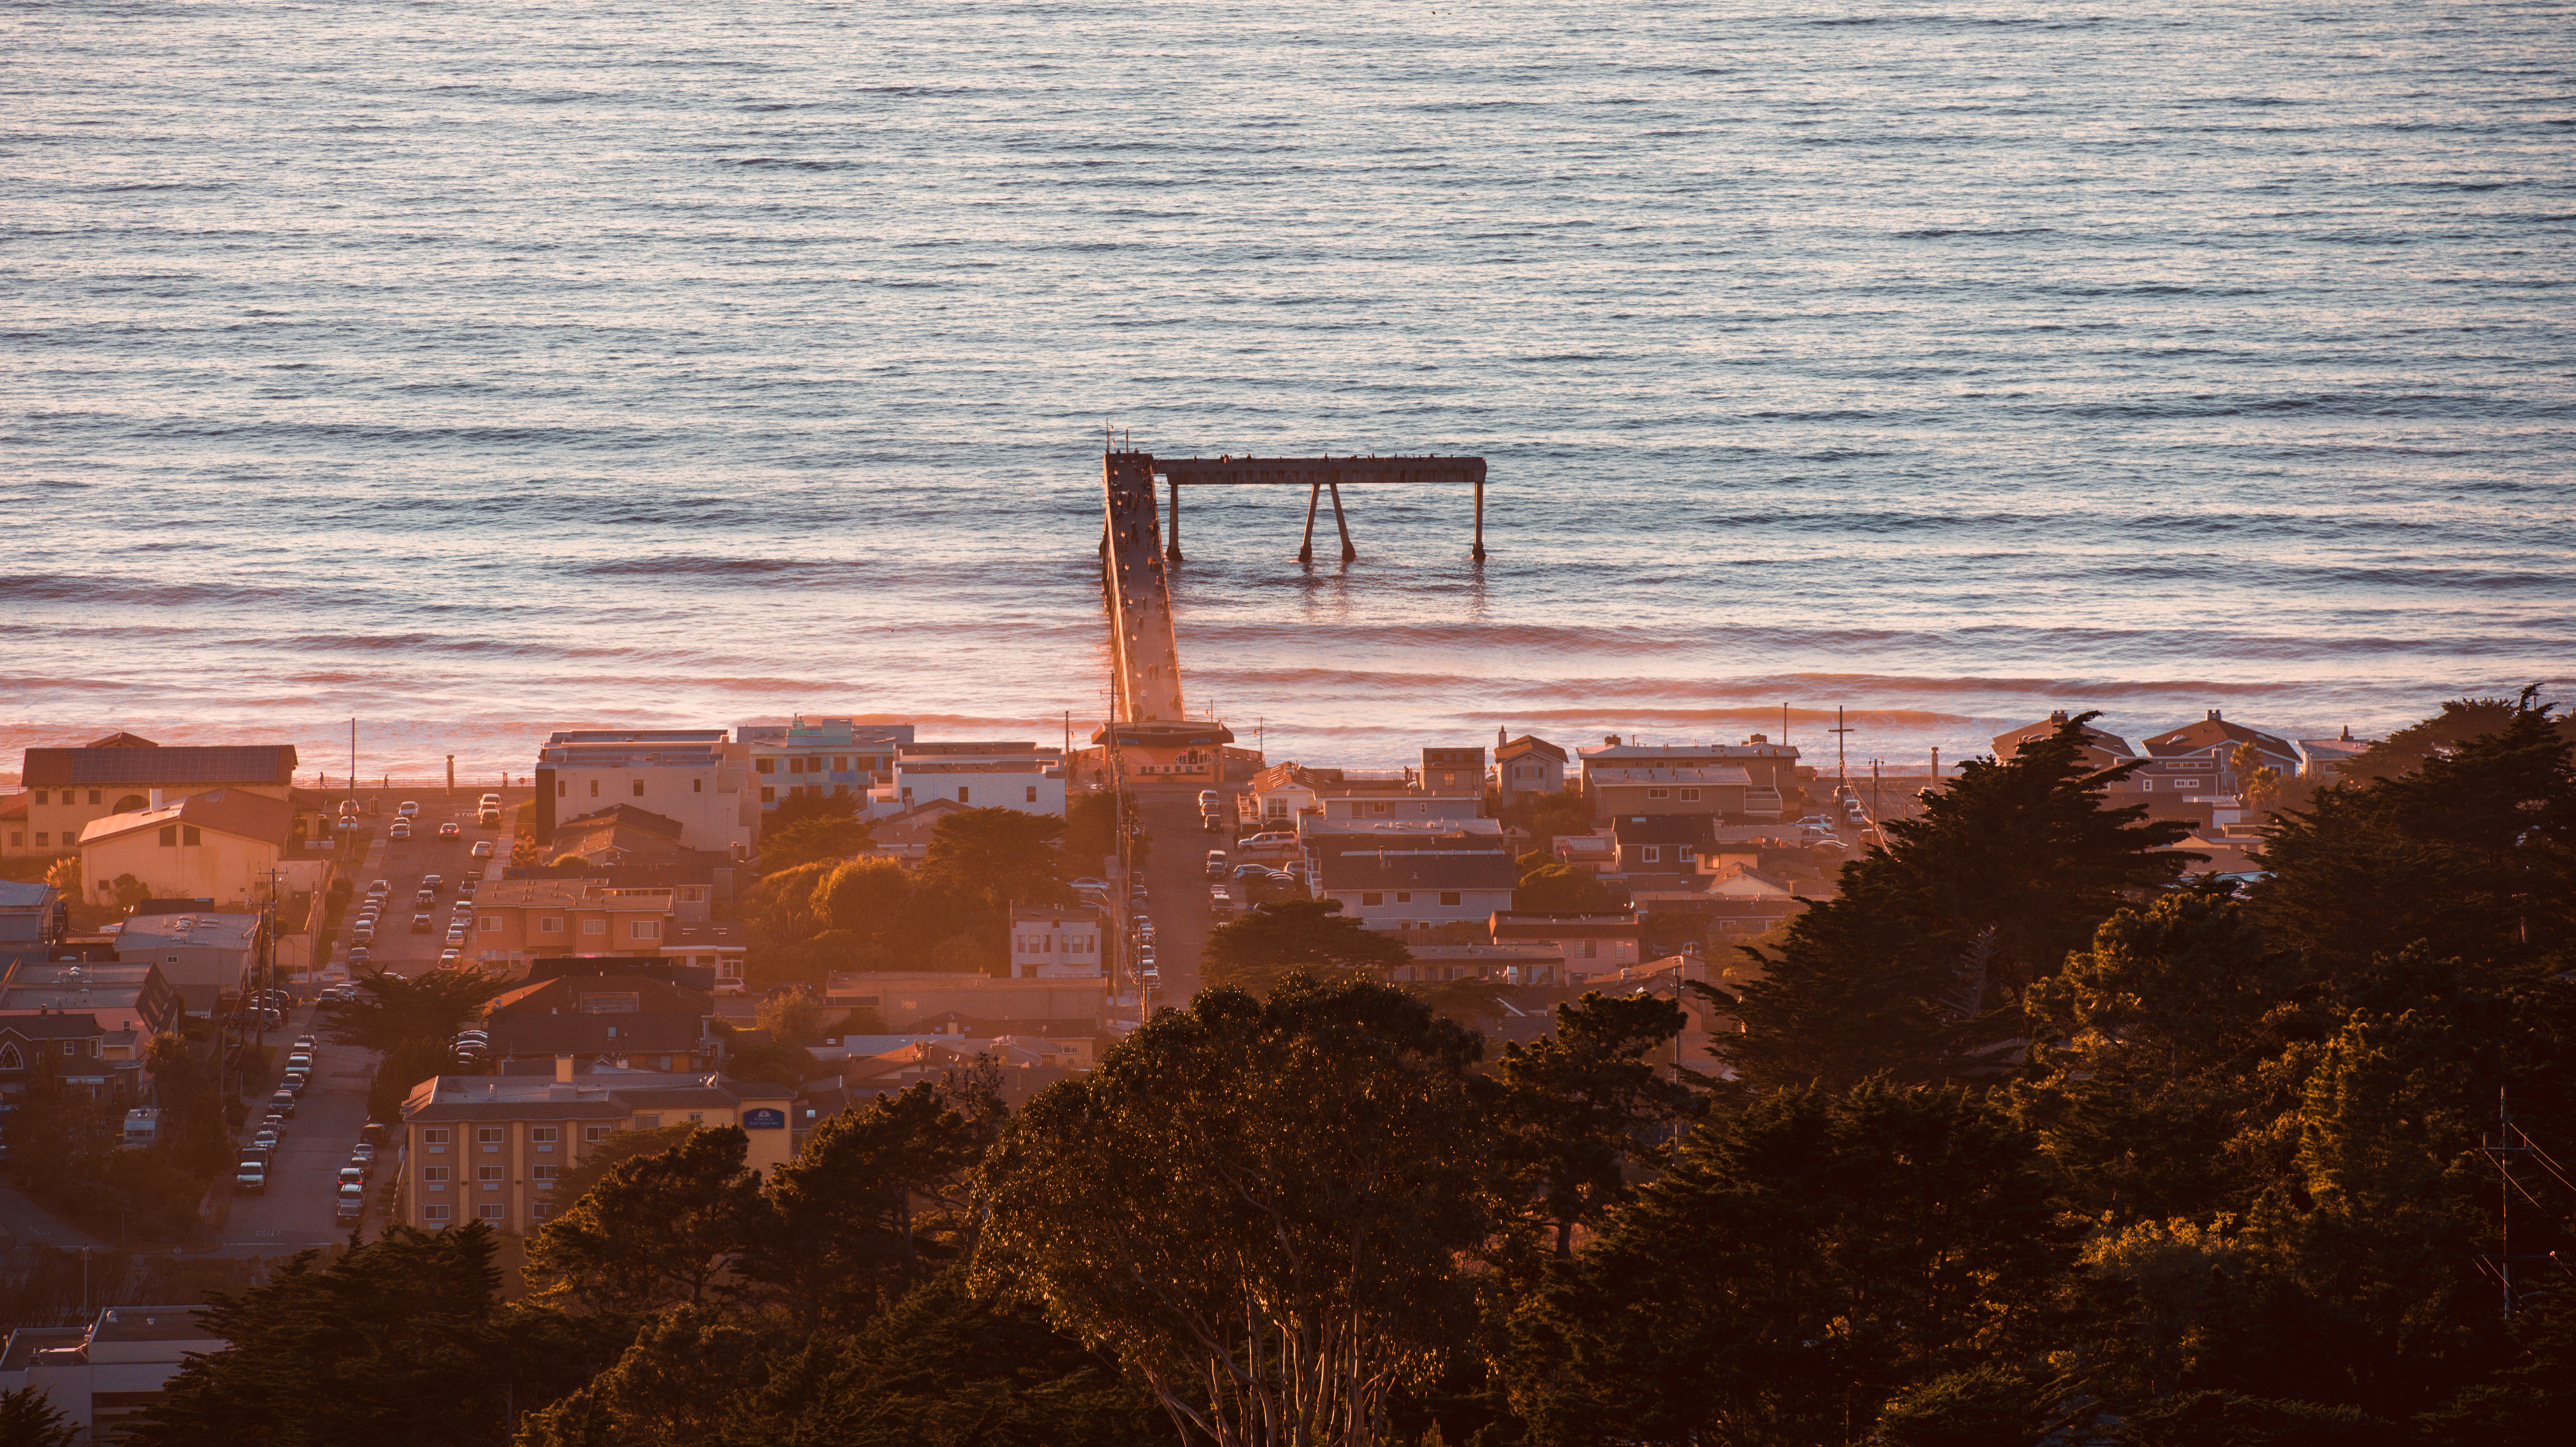 Overlook_of_Pacifica_Pier_and_town_by_BradleyWittke_SanMateoCounty_SiliconValley